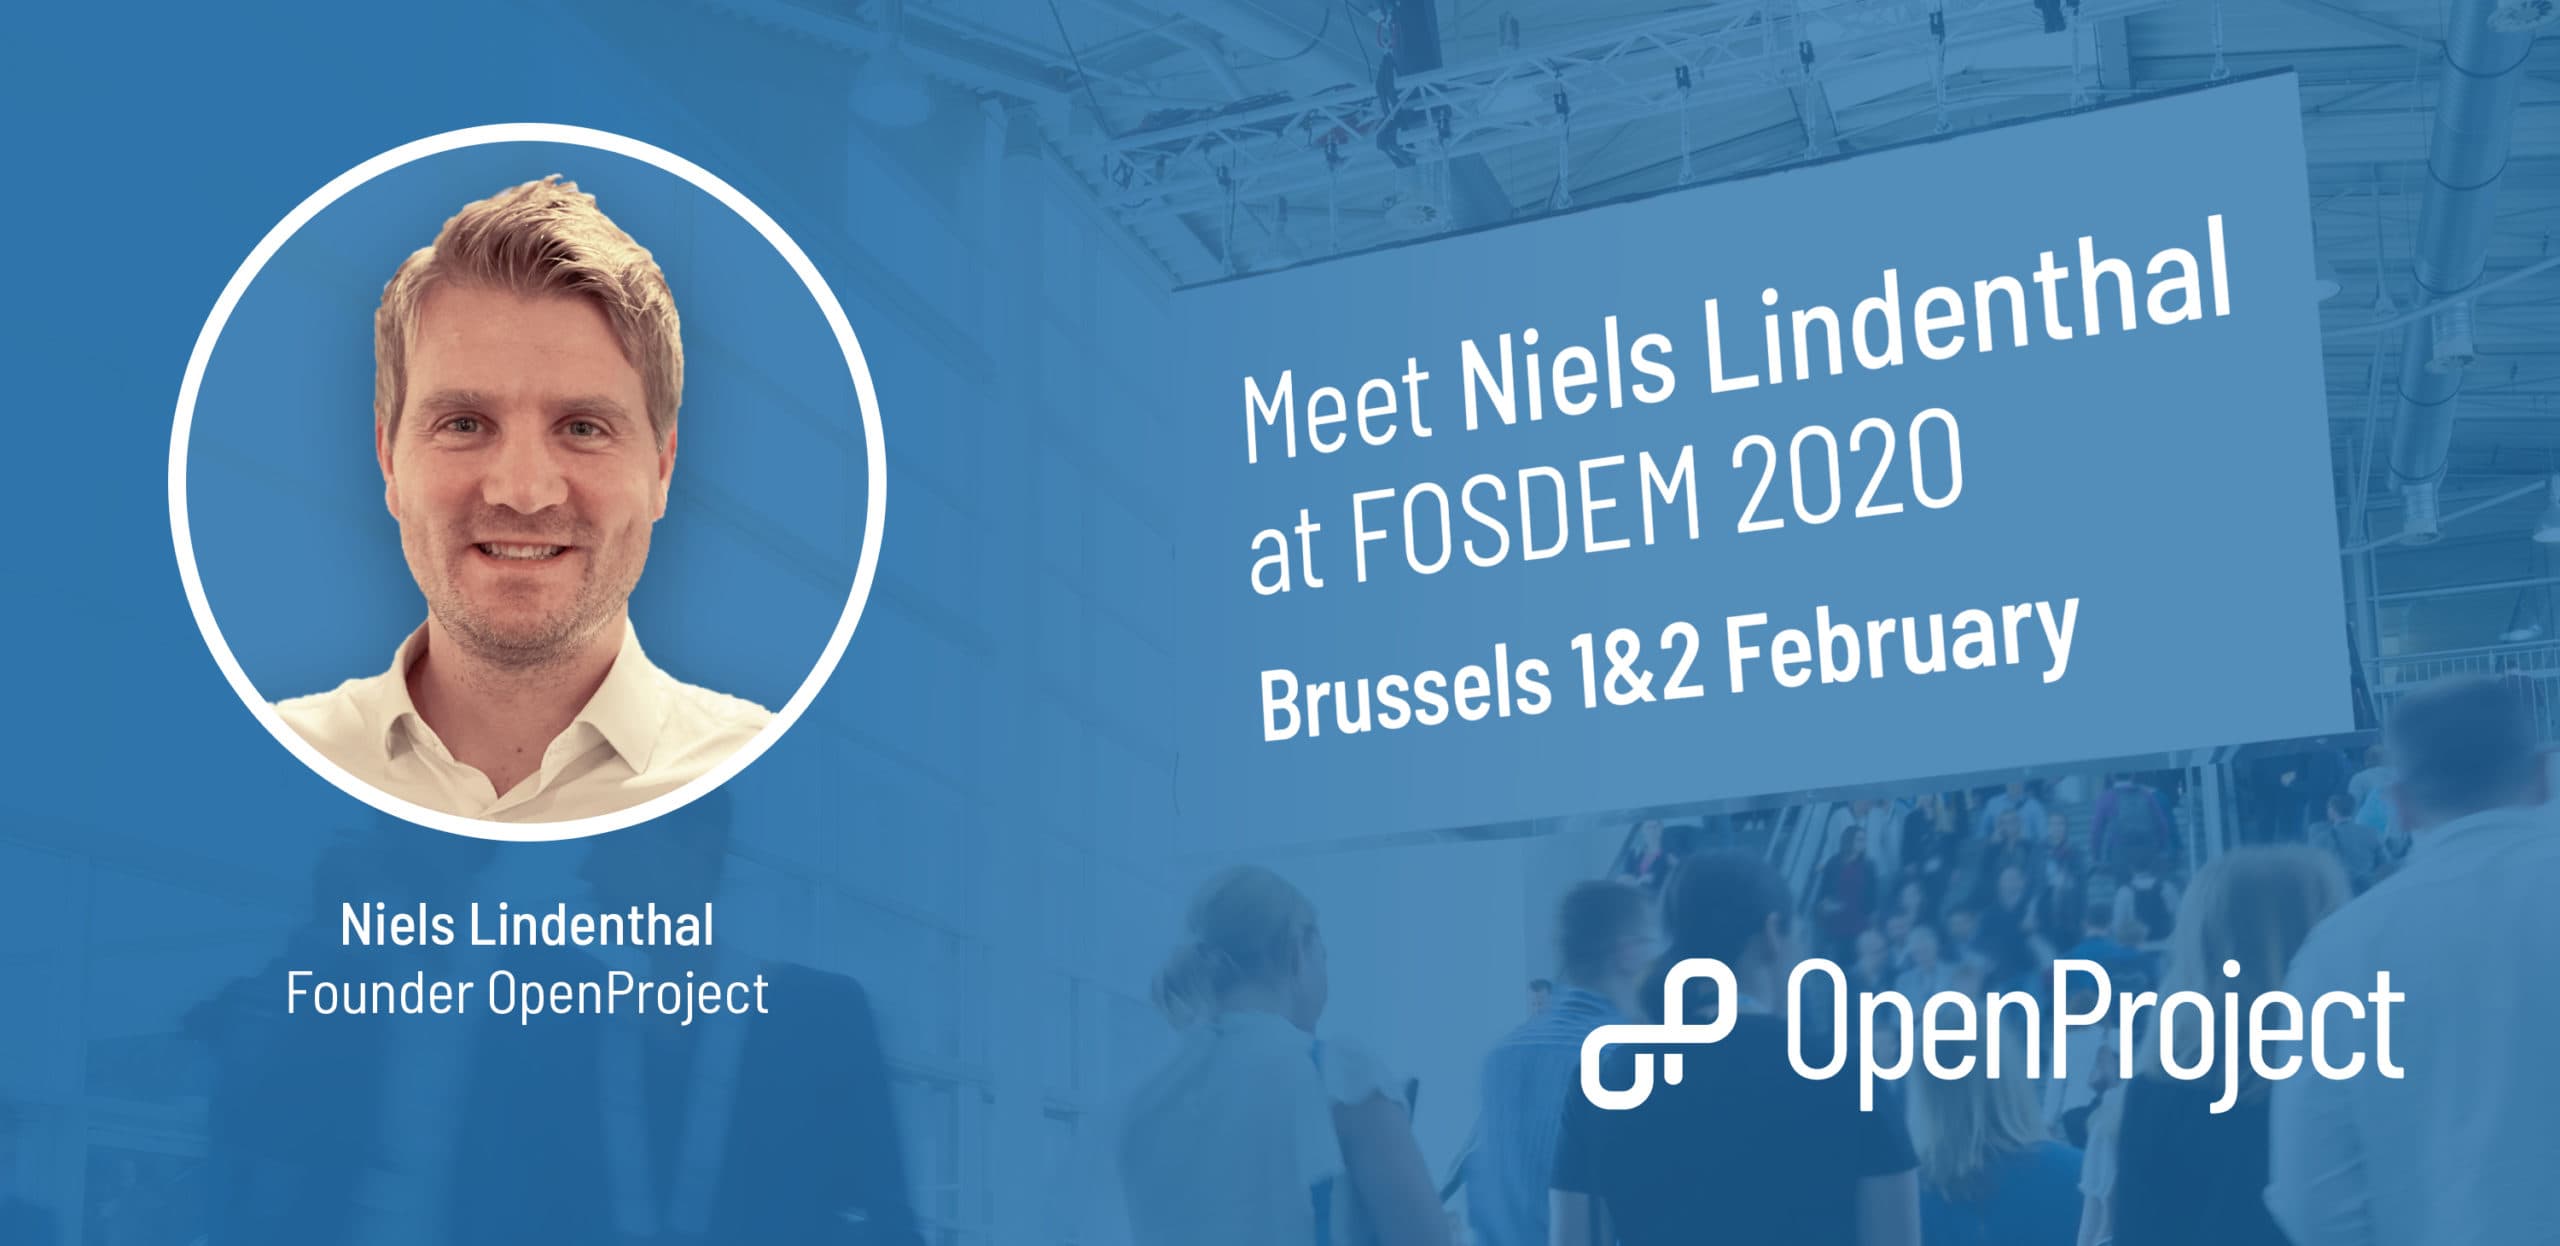 FOSDEM 2020 - Meet OpenProject founder and CEO Niels Lindenthal